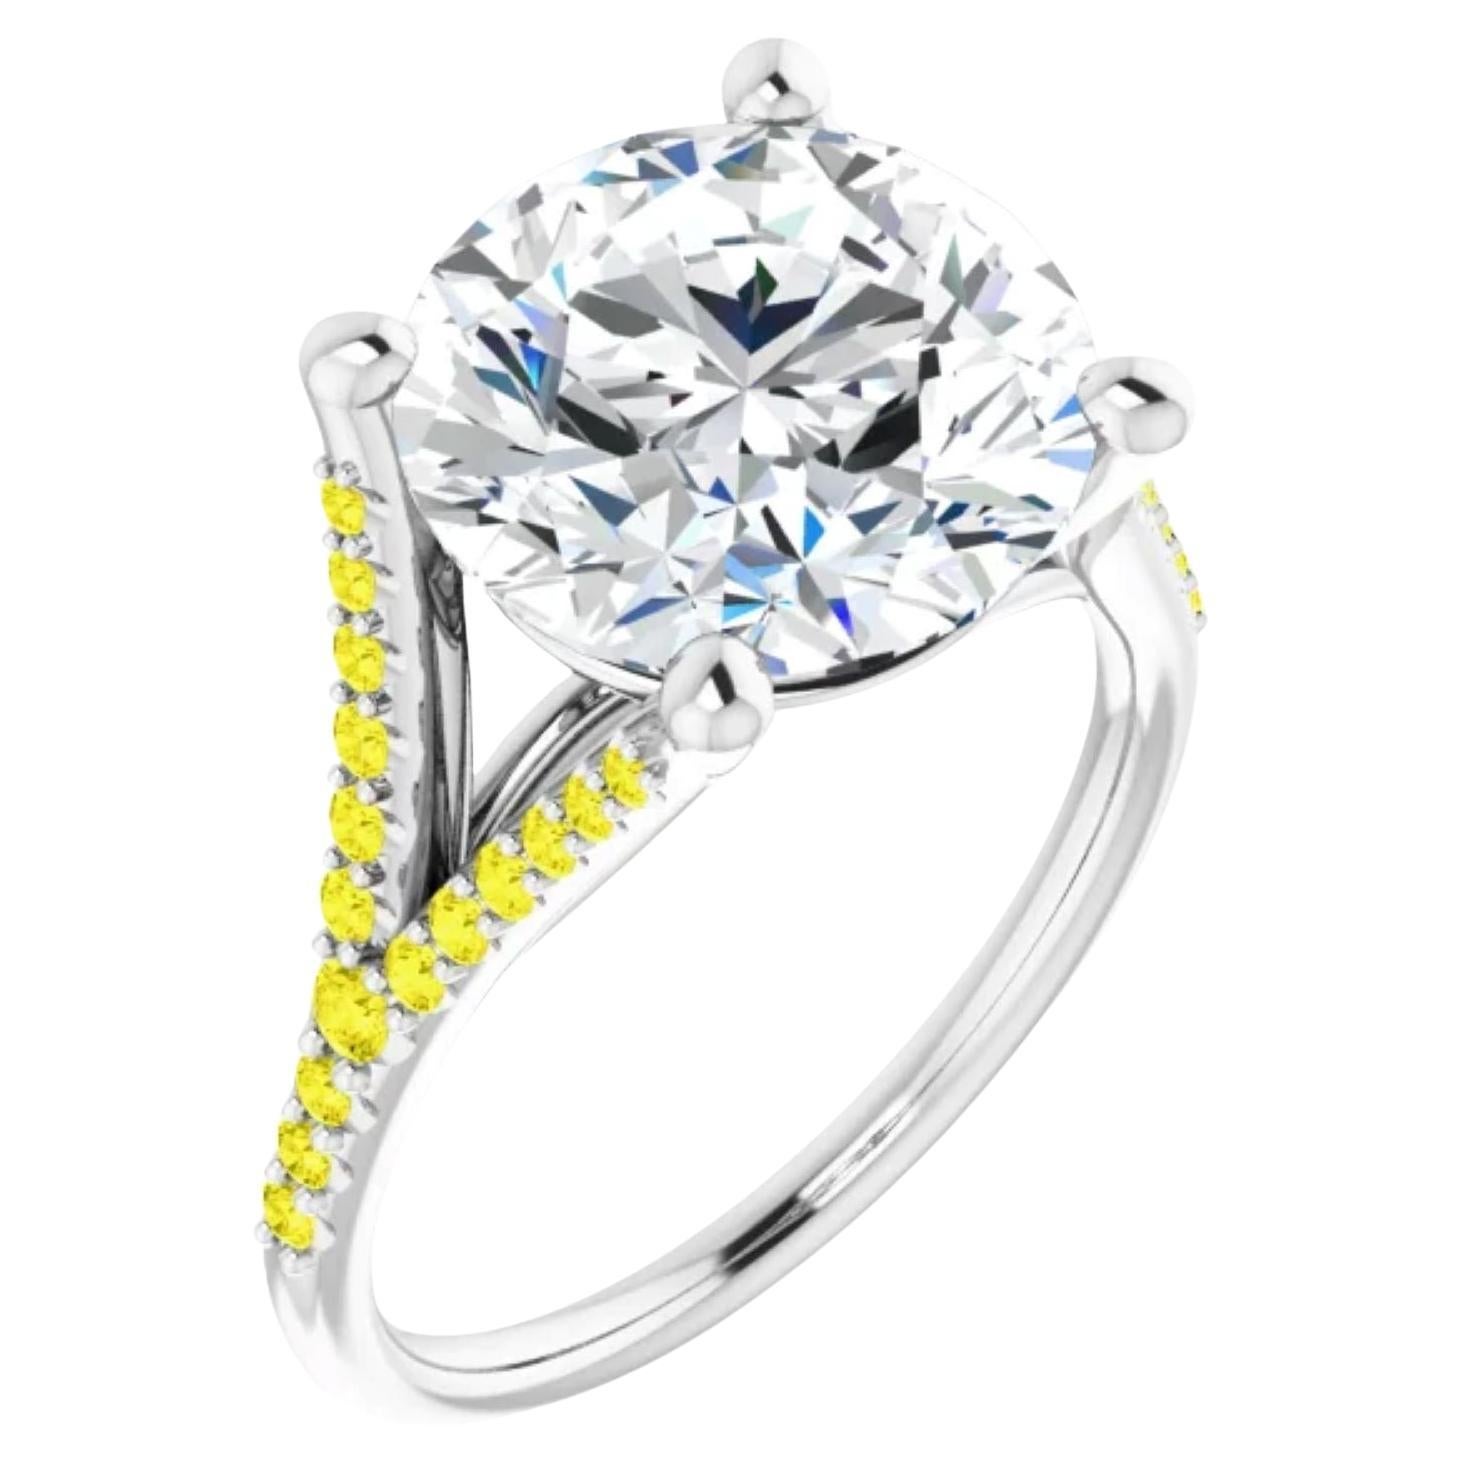 For Sale:  5 carat canary and white diamond engagement ring